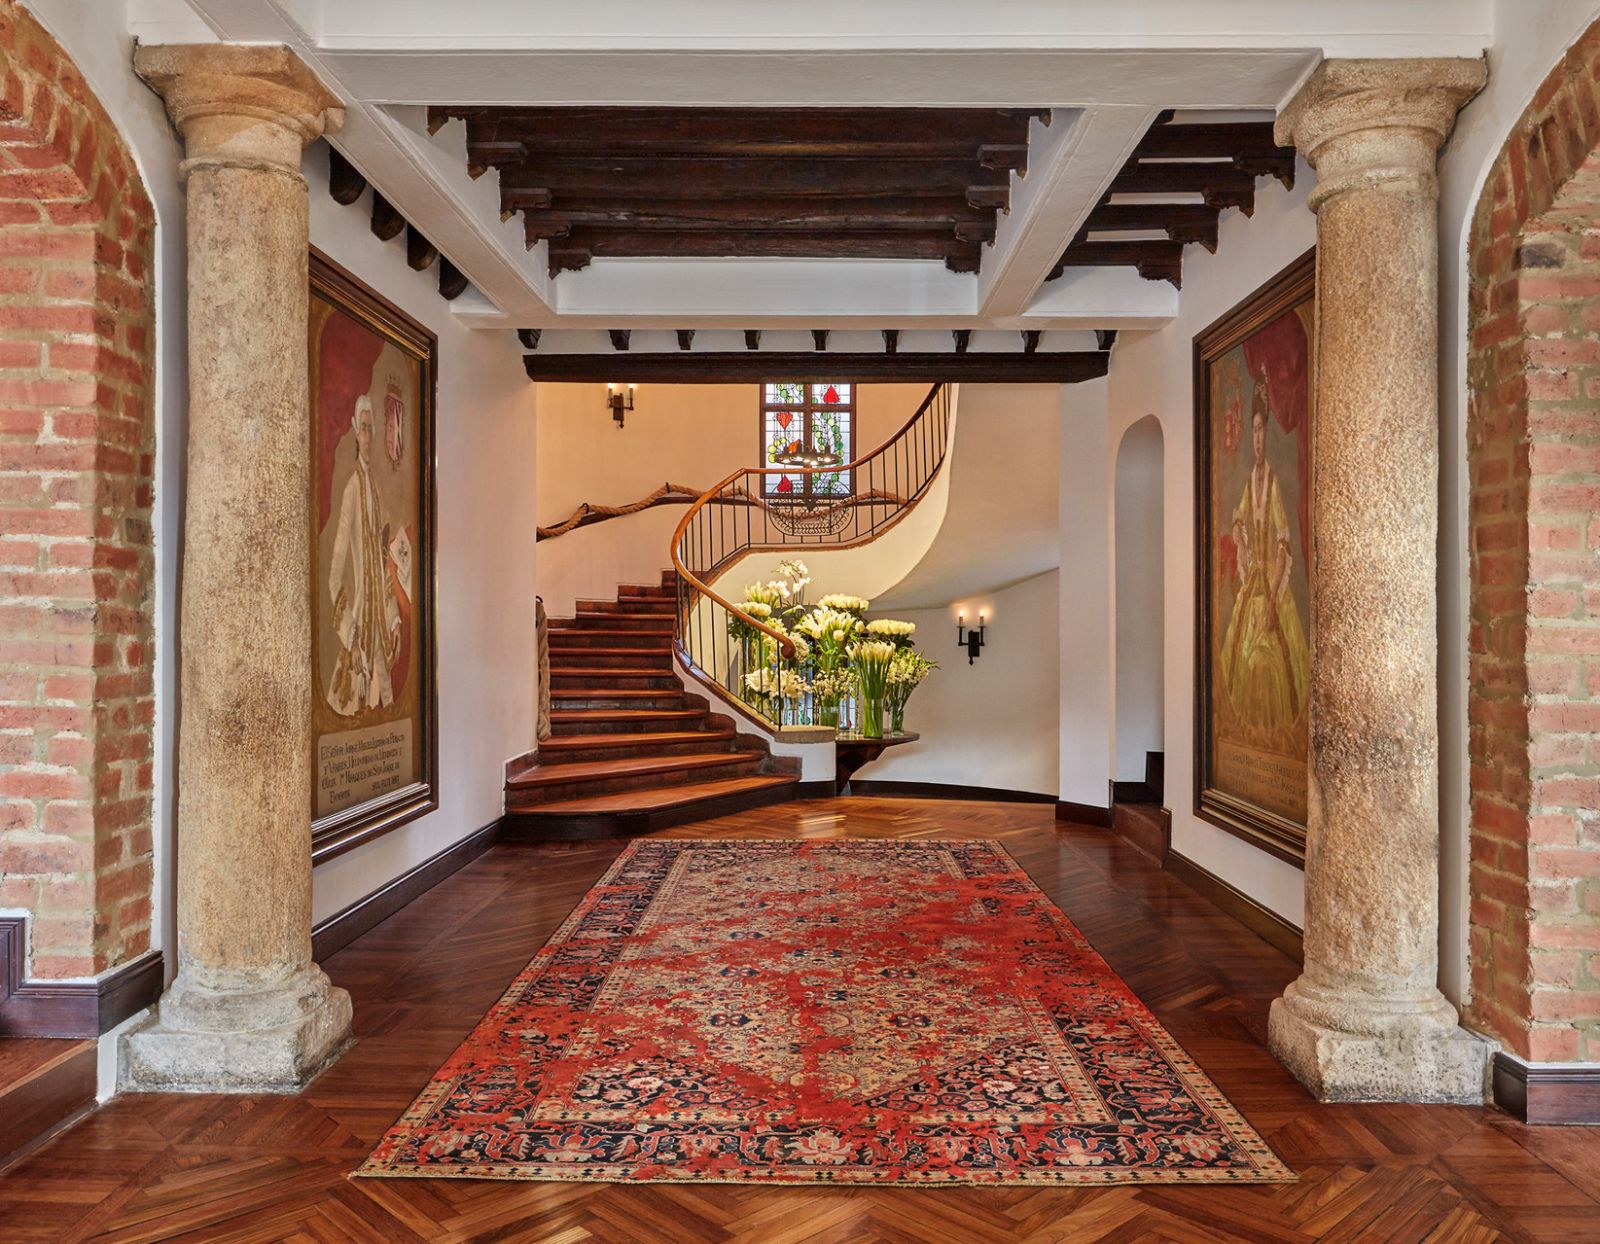 Staircase and hallway at Four Seasons casa Medina in Bogota, Colombia